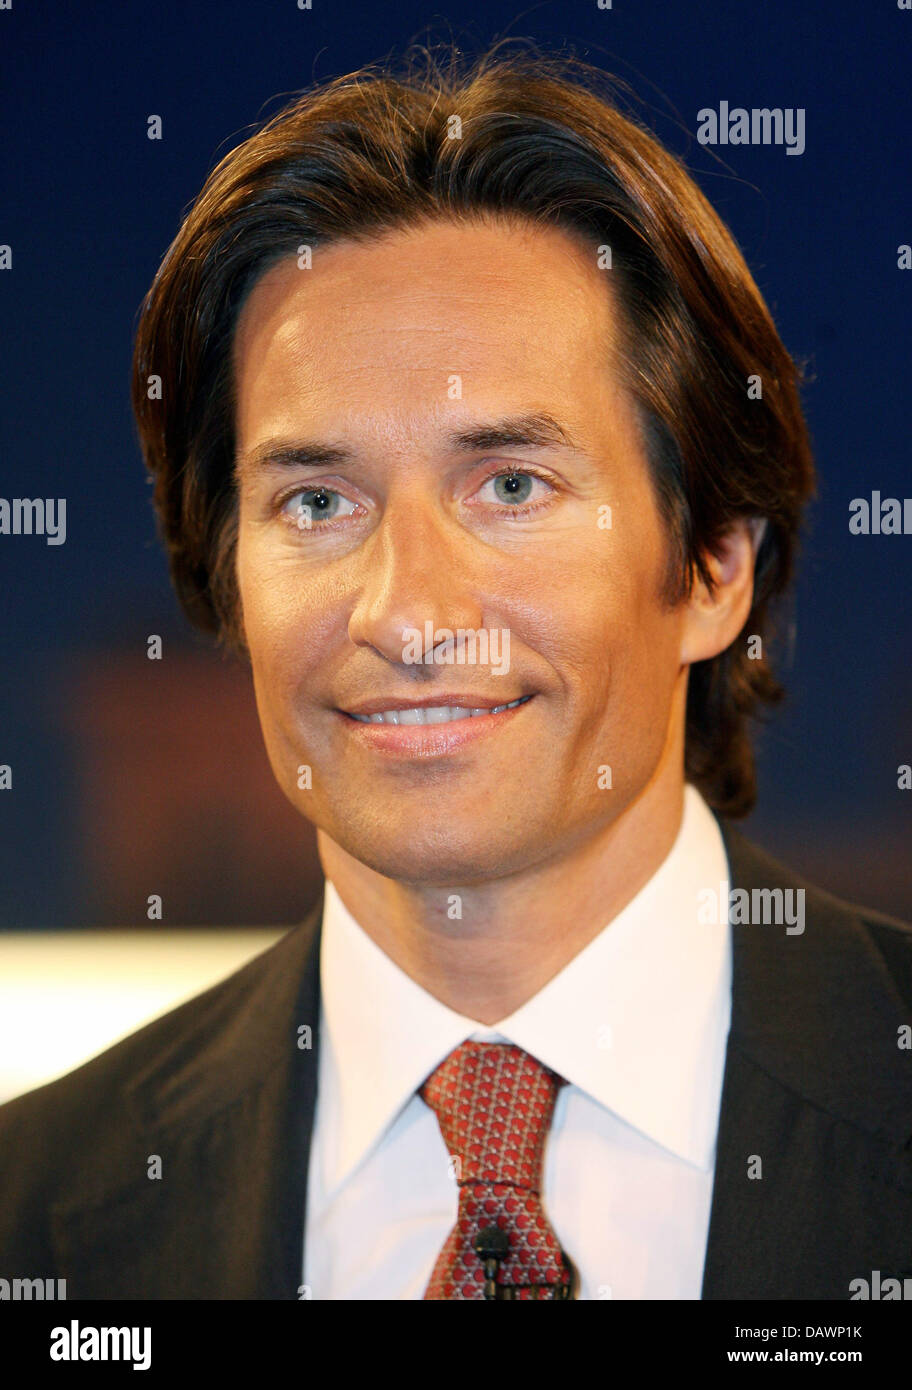 Karl-Heinz Grasser, investment manager and former Austrian Minister of Finance, pictured during the TV talk 'Sabine Christiansen' in Berlin, Germany, 03 June 2007. Photo: Marcel Mettelsiefen Stock Photo